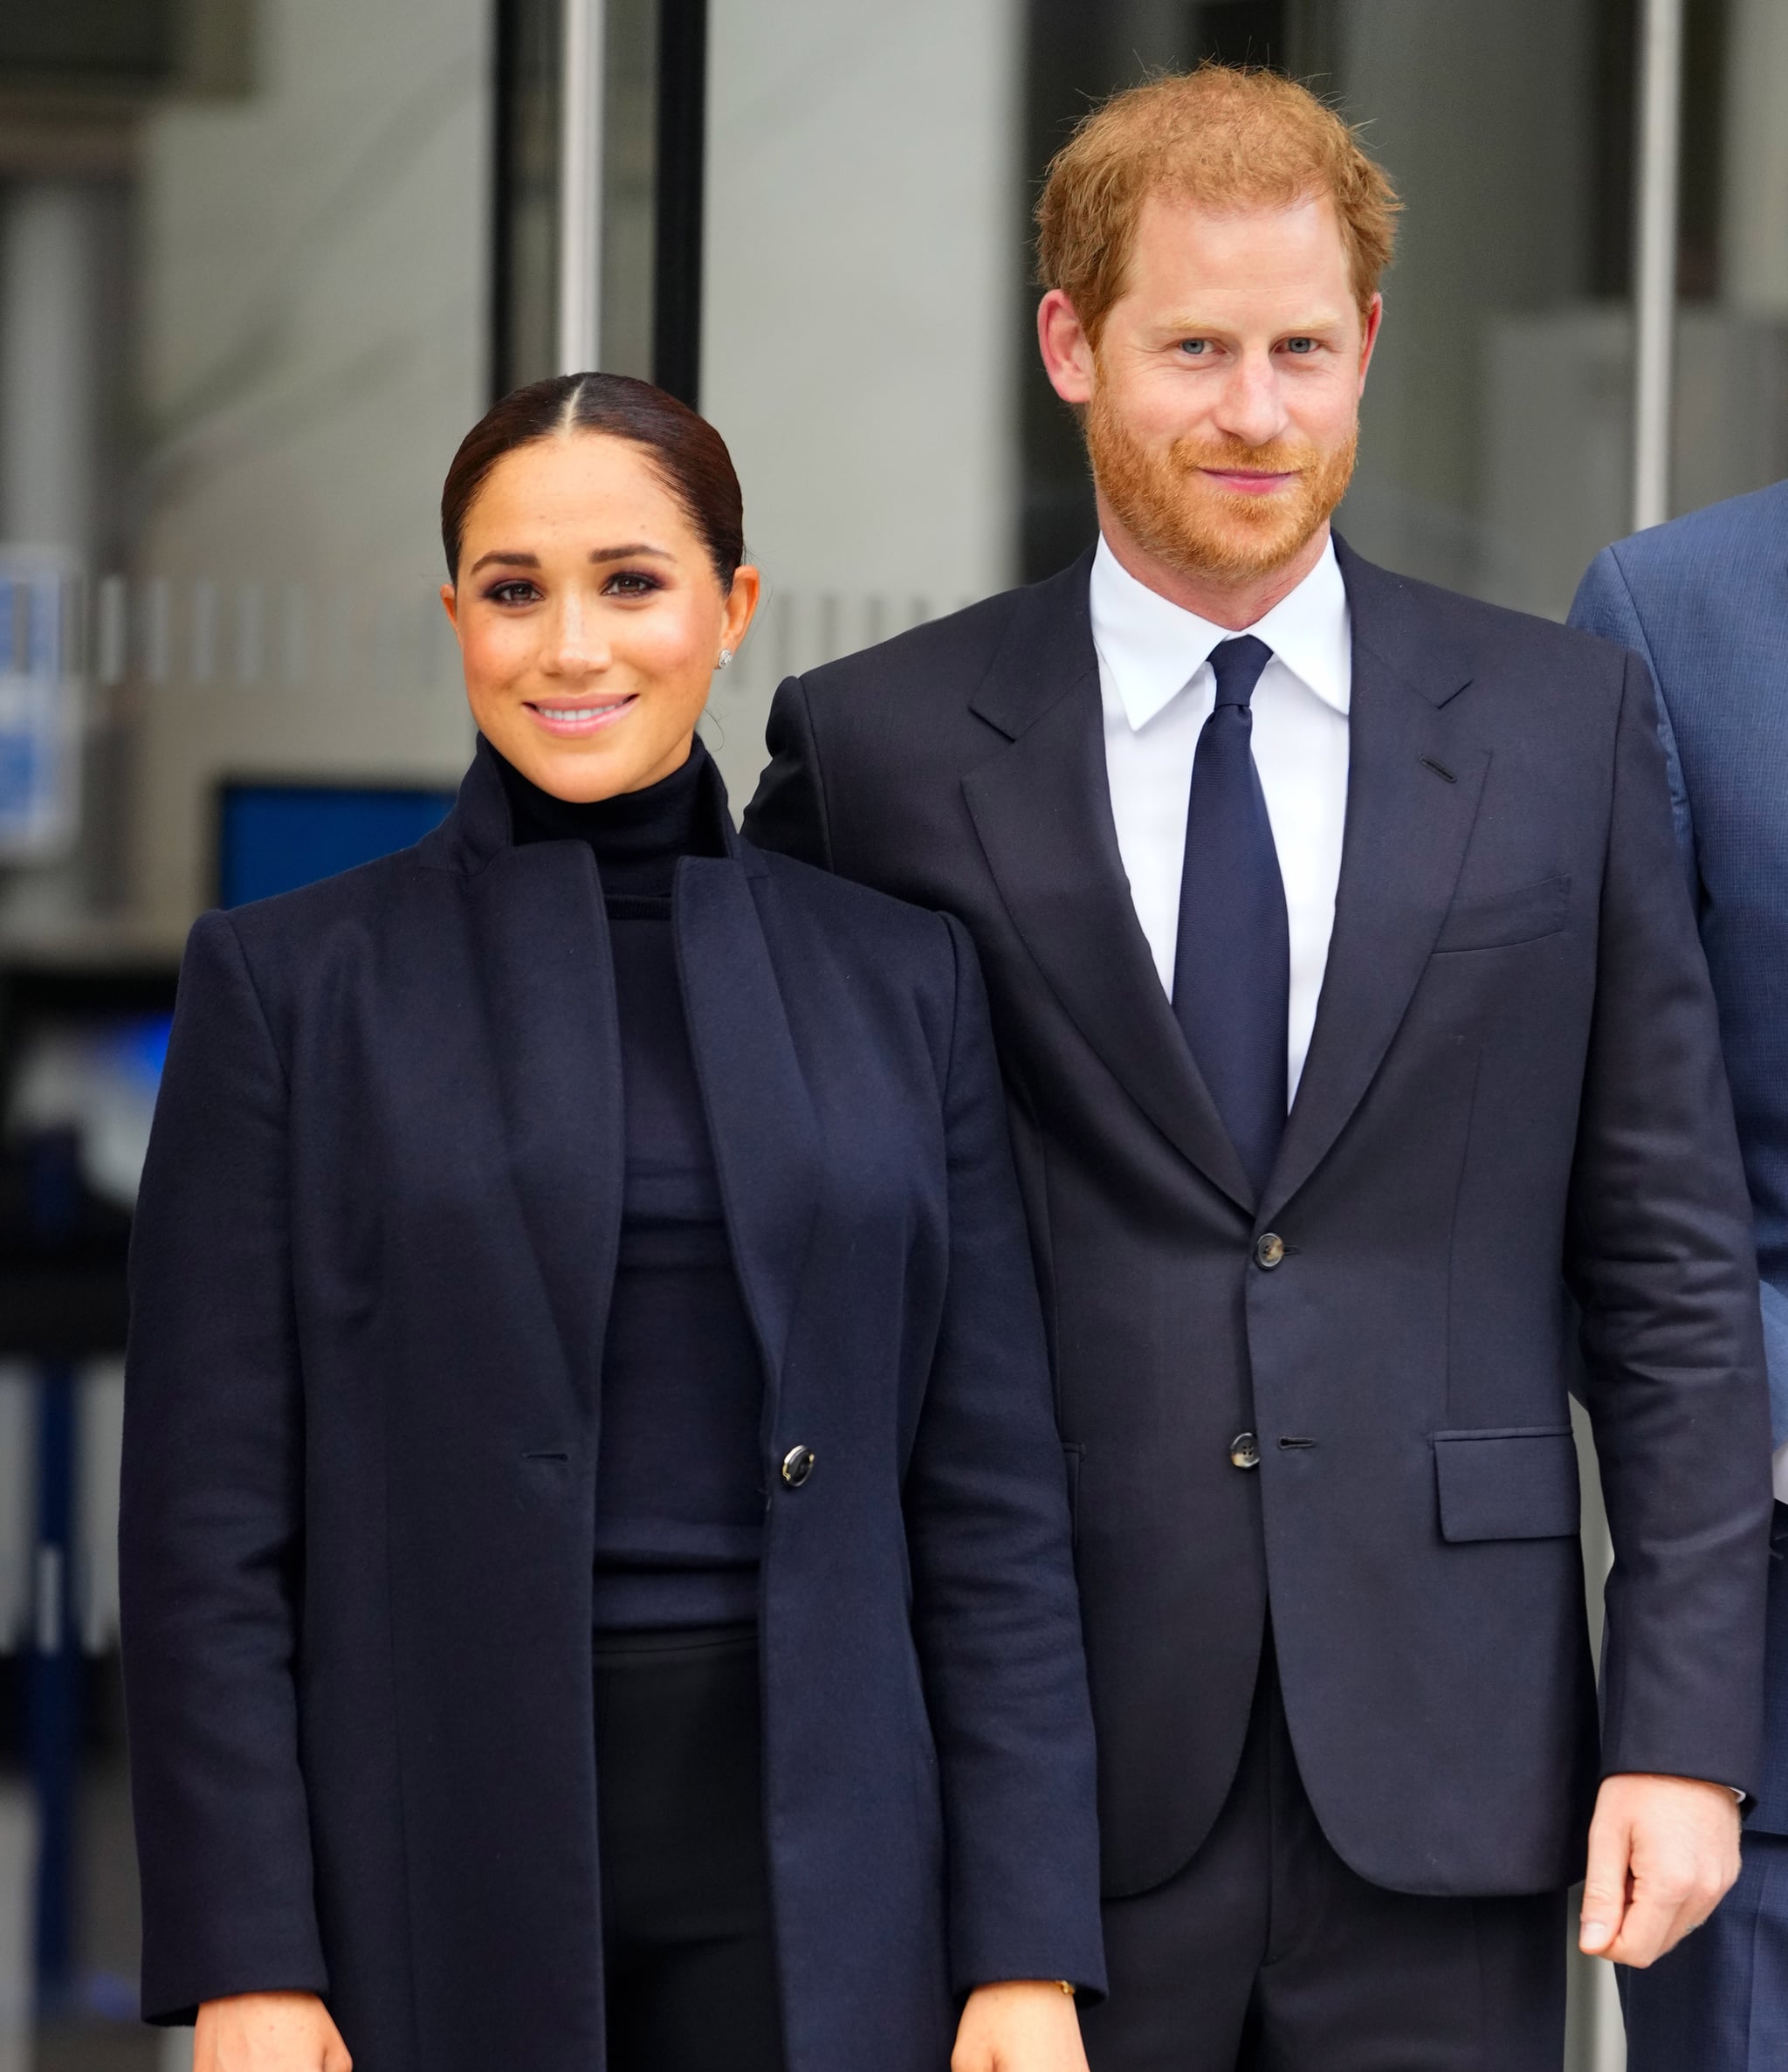 NEW YORK, NEW YORK - SEPTEMBER 23: Prince Harry and Meghan Markle, Duke and Duchess of Sussex visit 1 World Trade Centre on September 23, 2021 in New York City. (Photo by Gotham/GC Images)